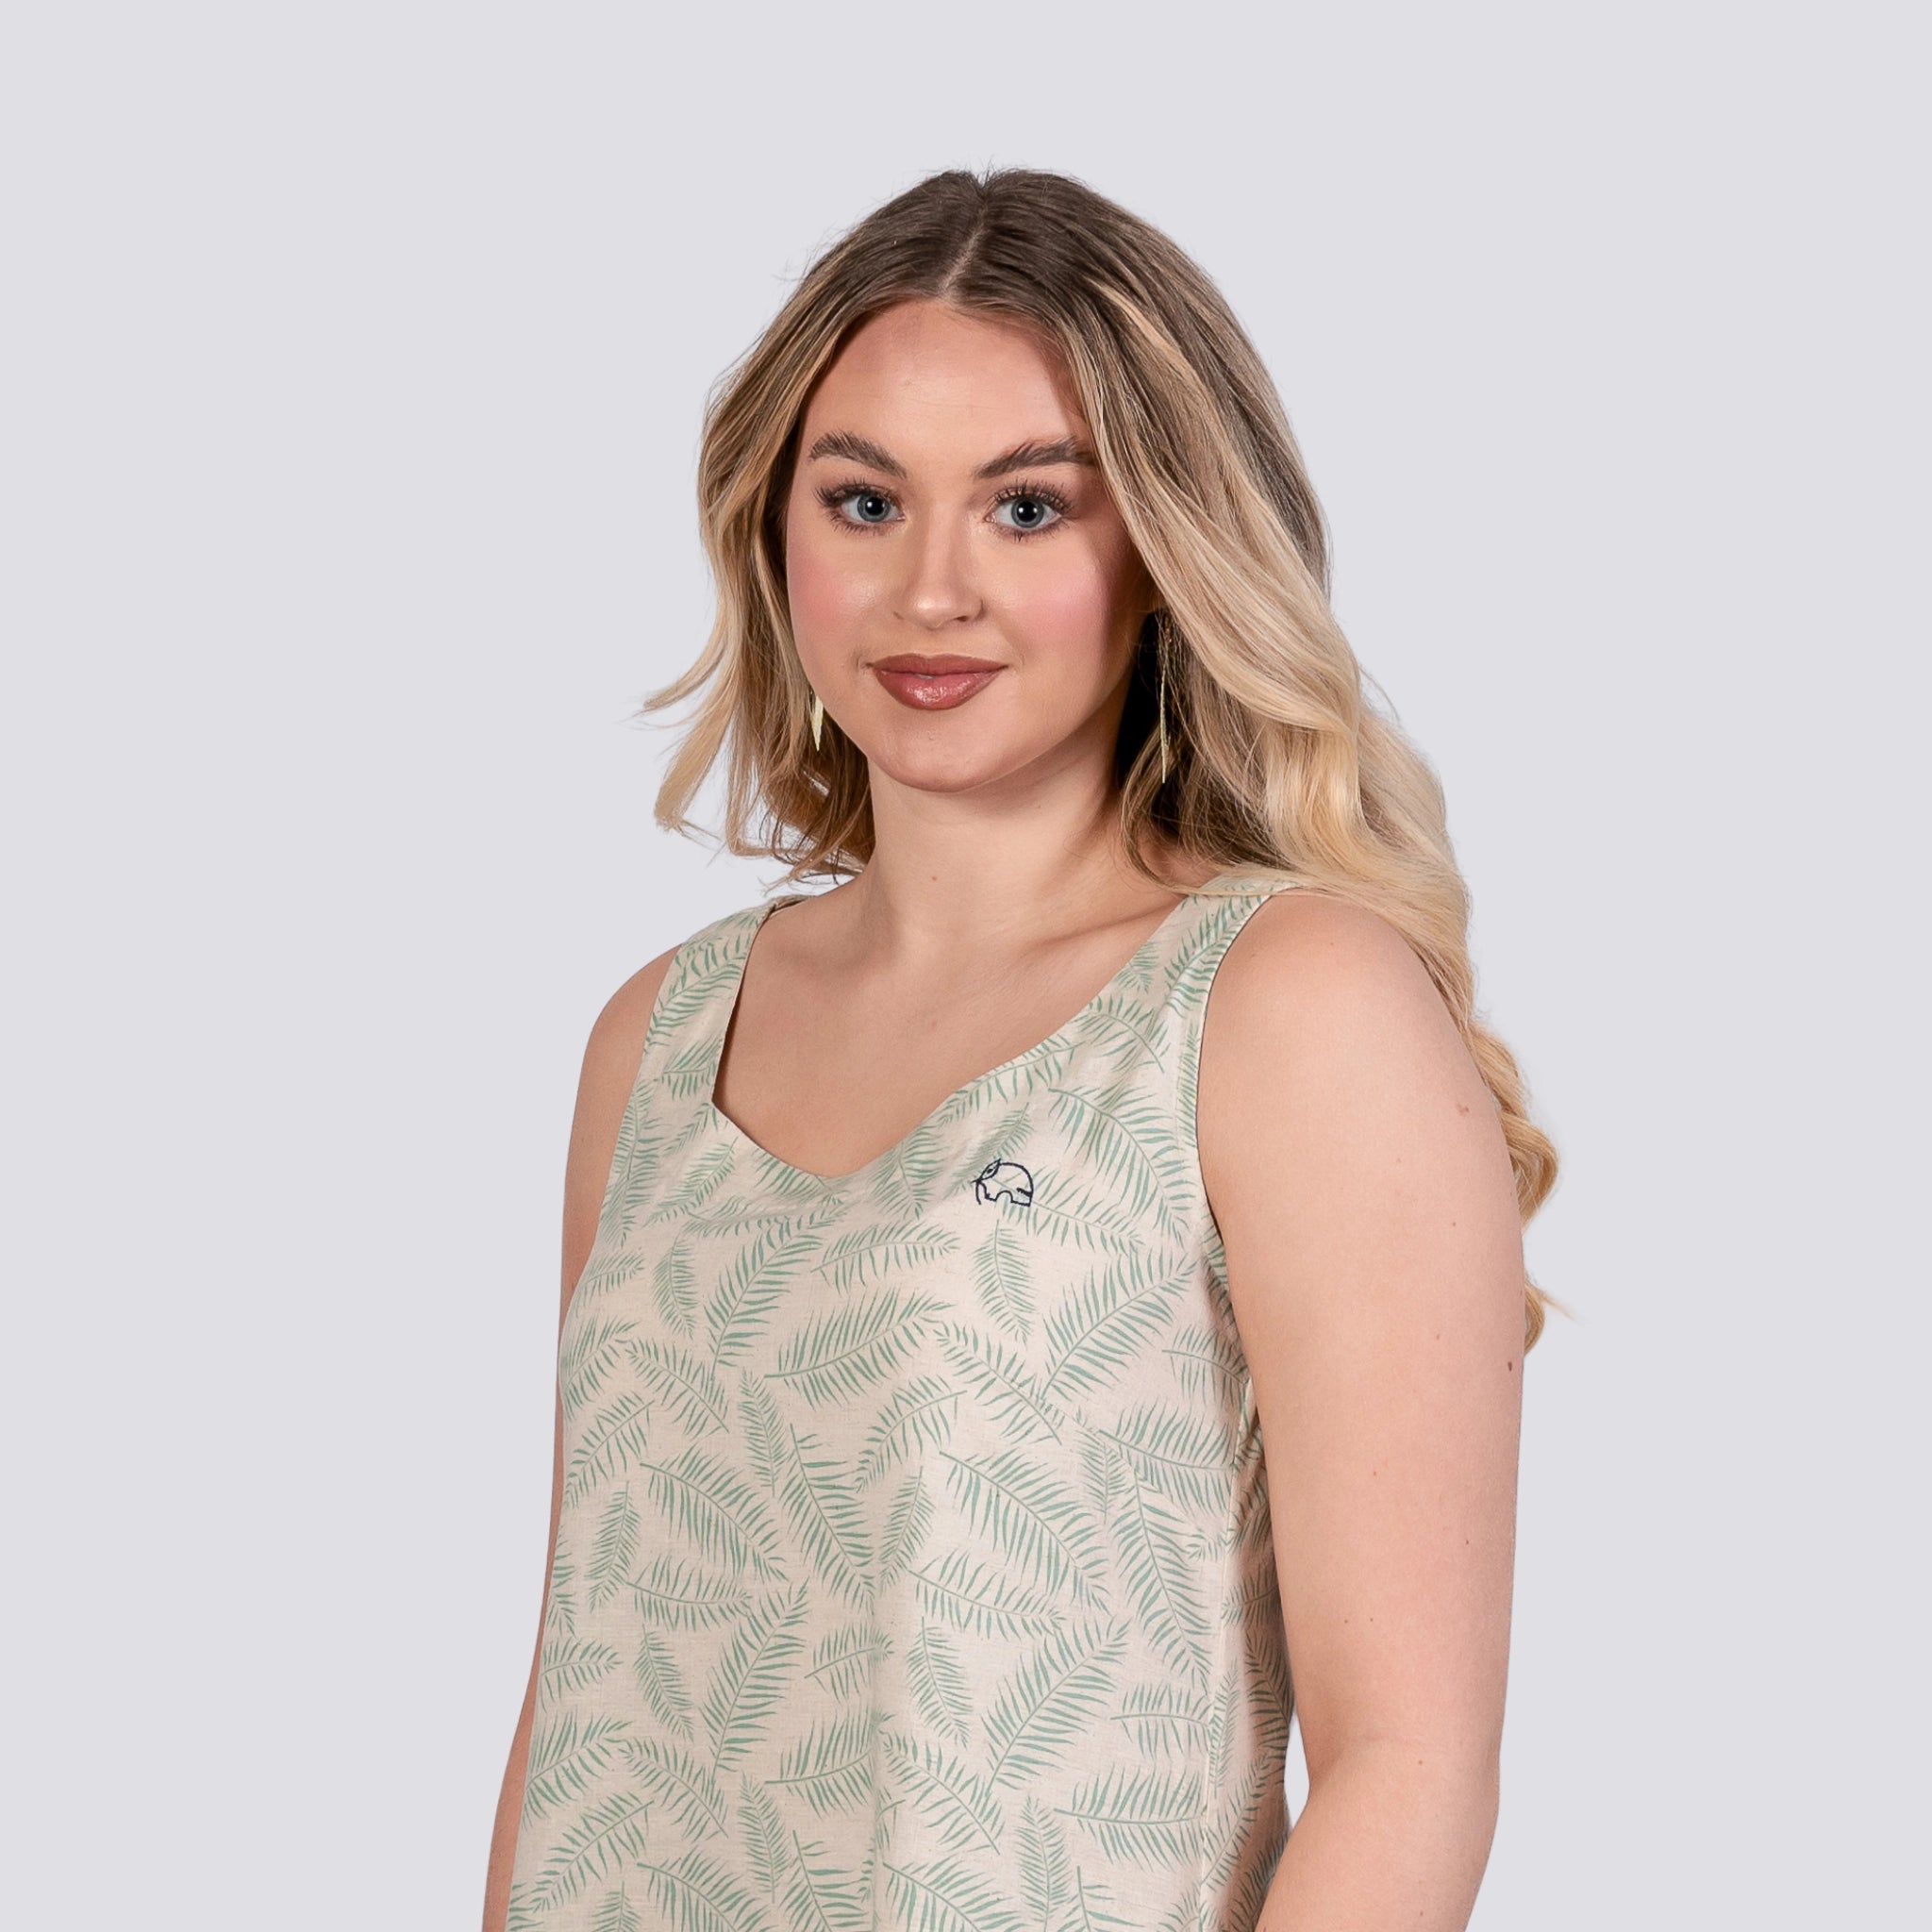 A young woman with blonde hair smiling at the camera, wearing a sleeveless U-neck top with a fern pattern. The background is light gray.
Product: Karee Mystic Breeze High Low Linen Cotton Midi Dress